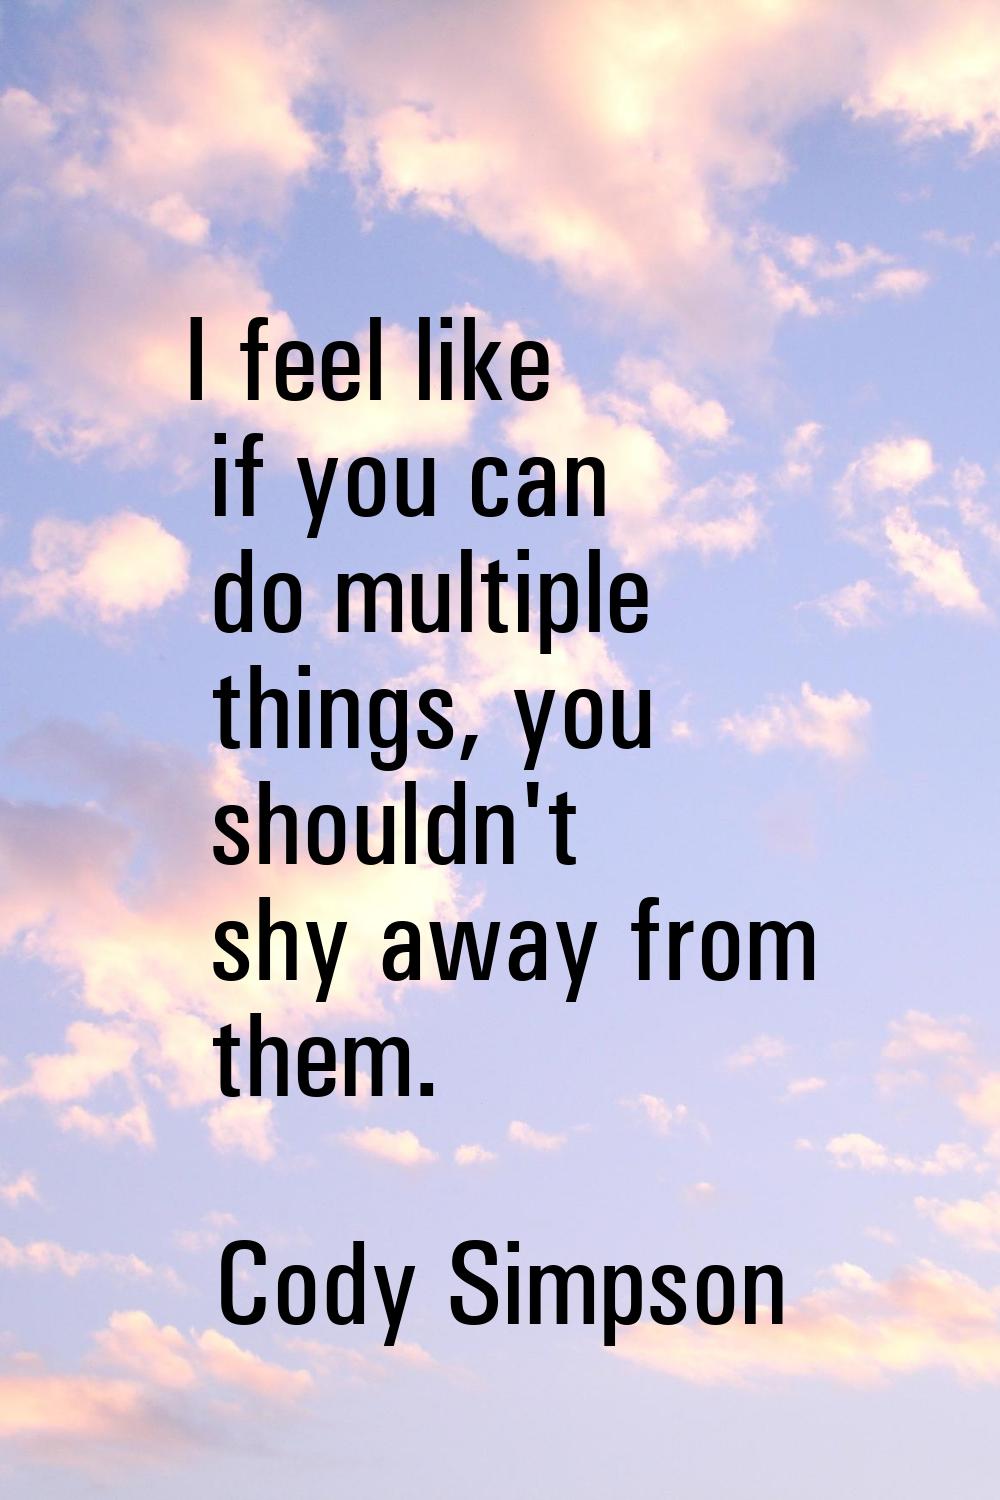 I feel like if you can do multiple things, you shouldn't shy away from them.